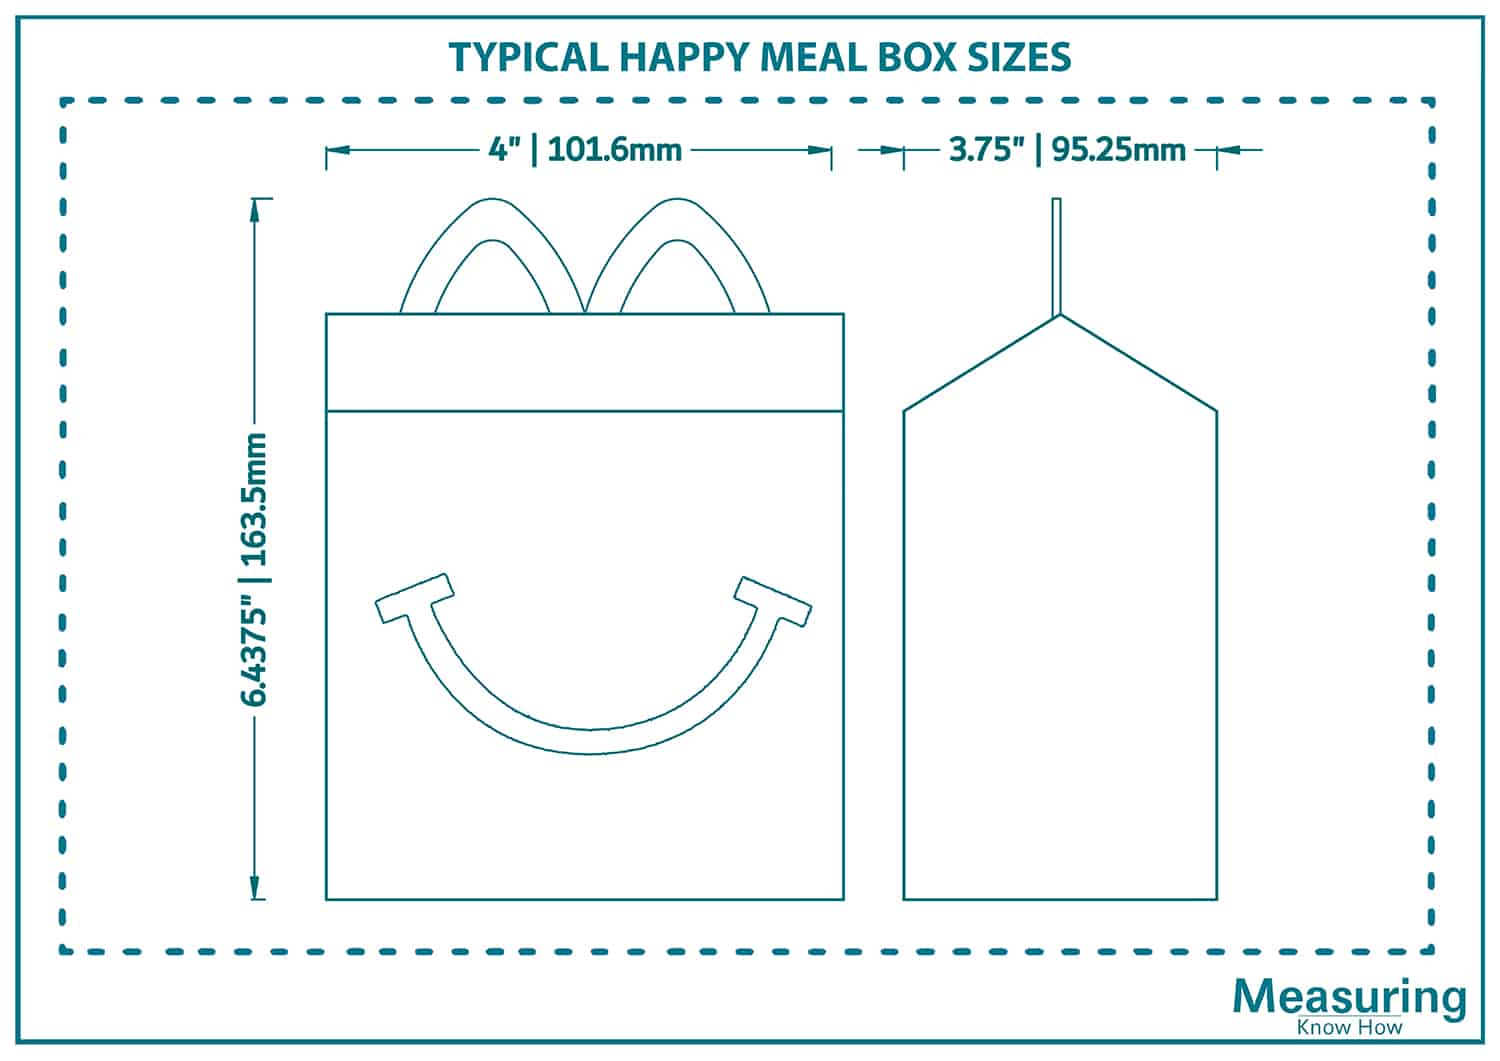 Typical happy meal box sizes